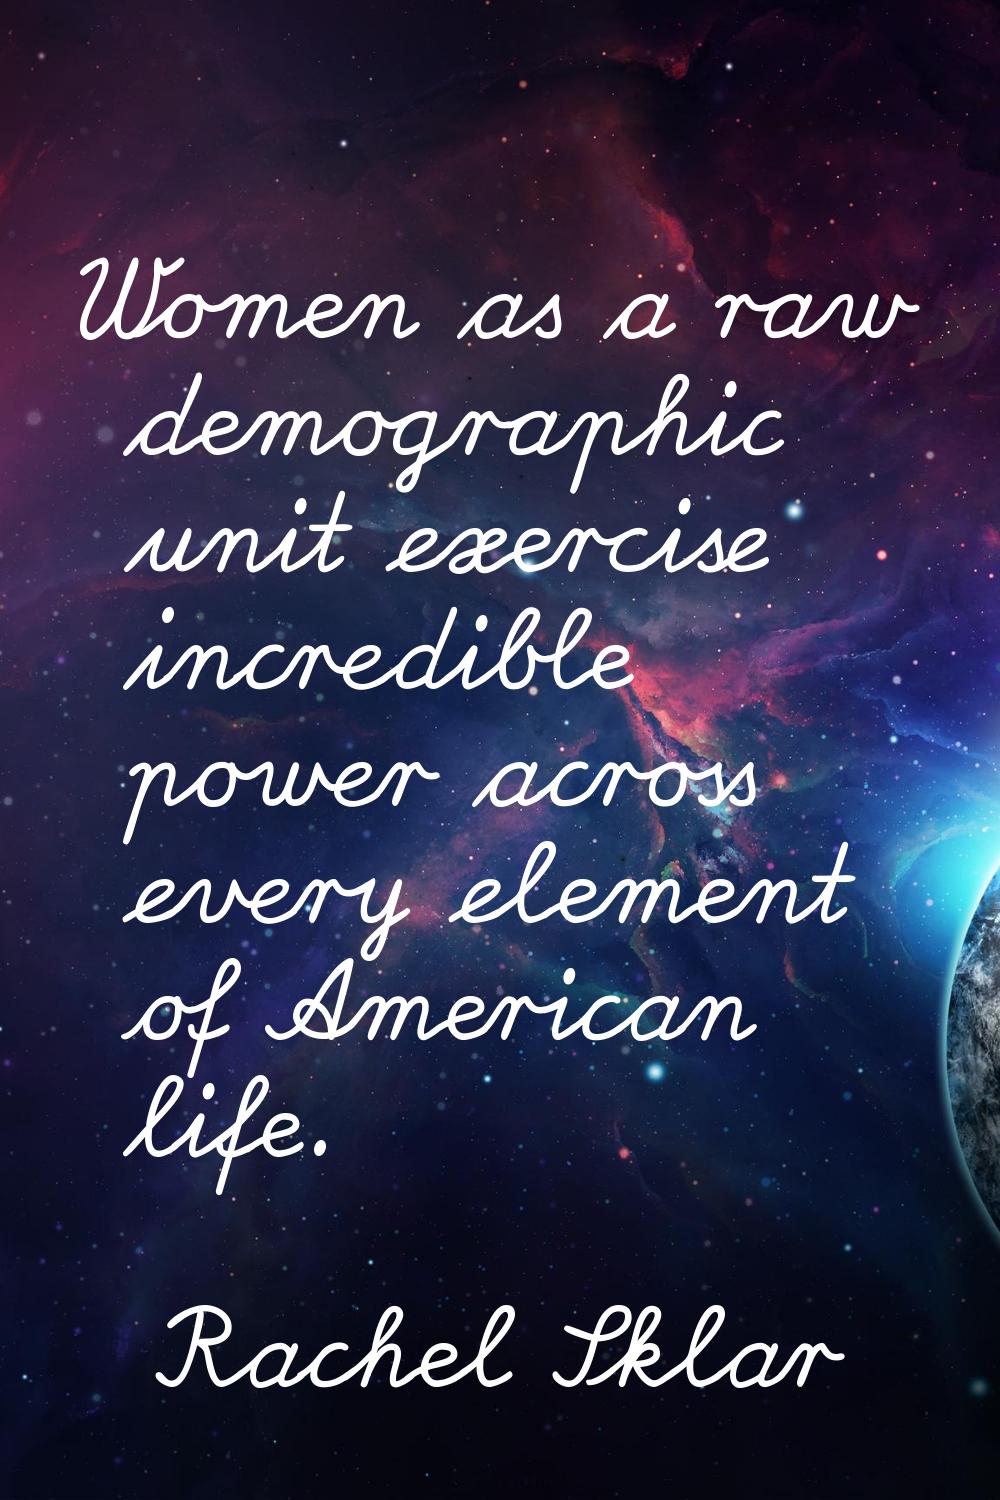 Women as a raw demographic unit exercise incredible power across every element of American life.